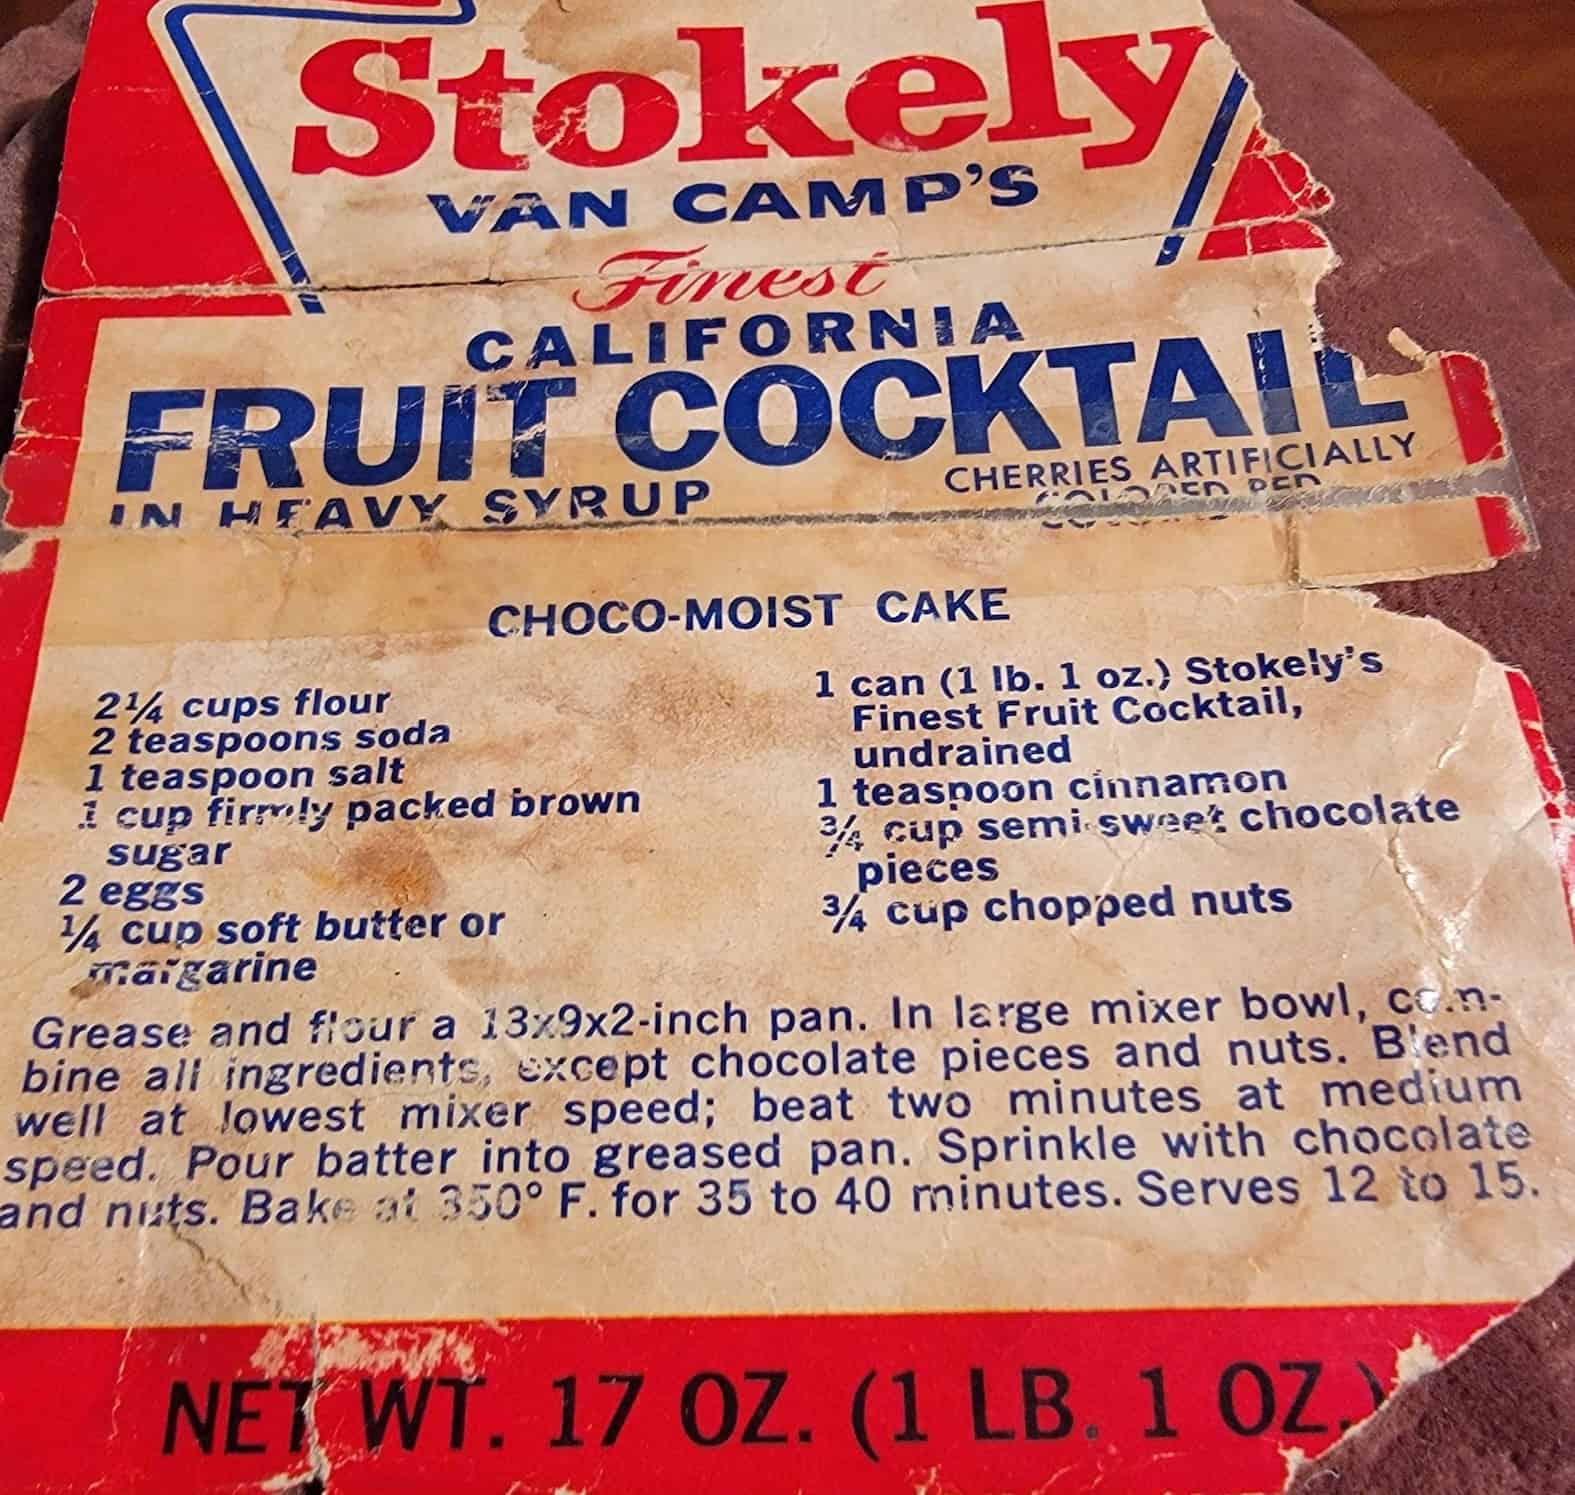 Cake recipe from an old Stokely Fruit Cocktail label